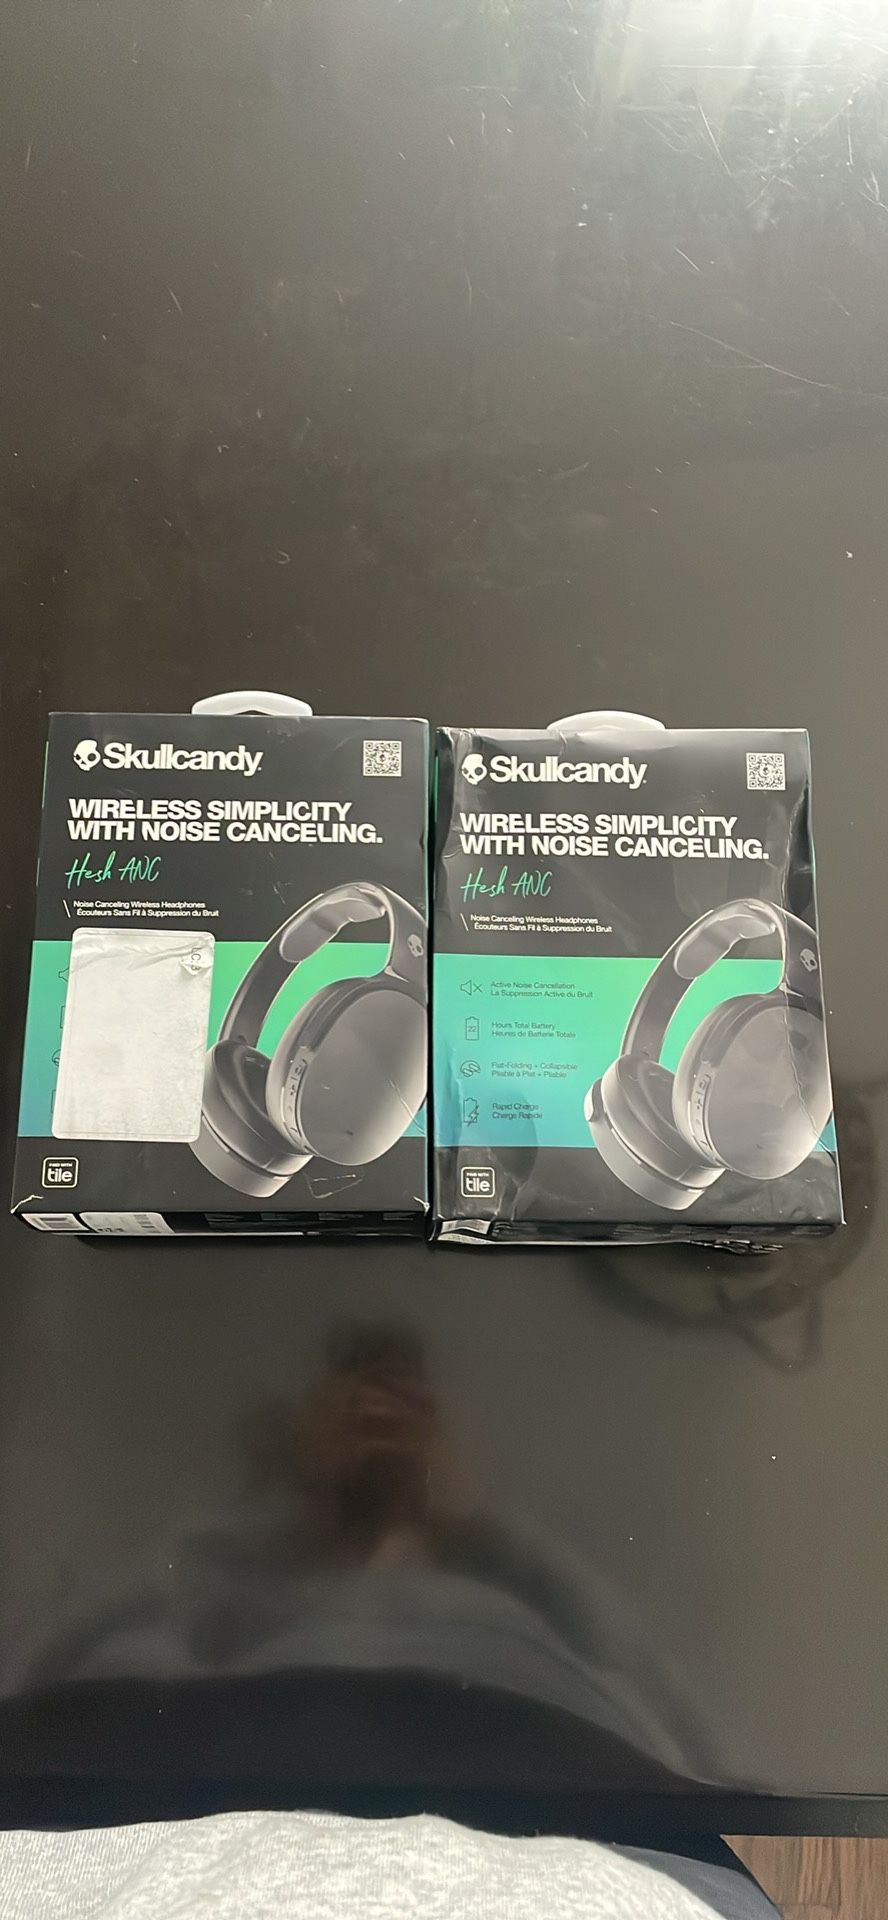 Skullcandy Wireless Simplicity With Noise Canceling